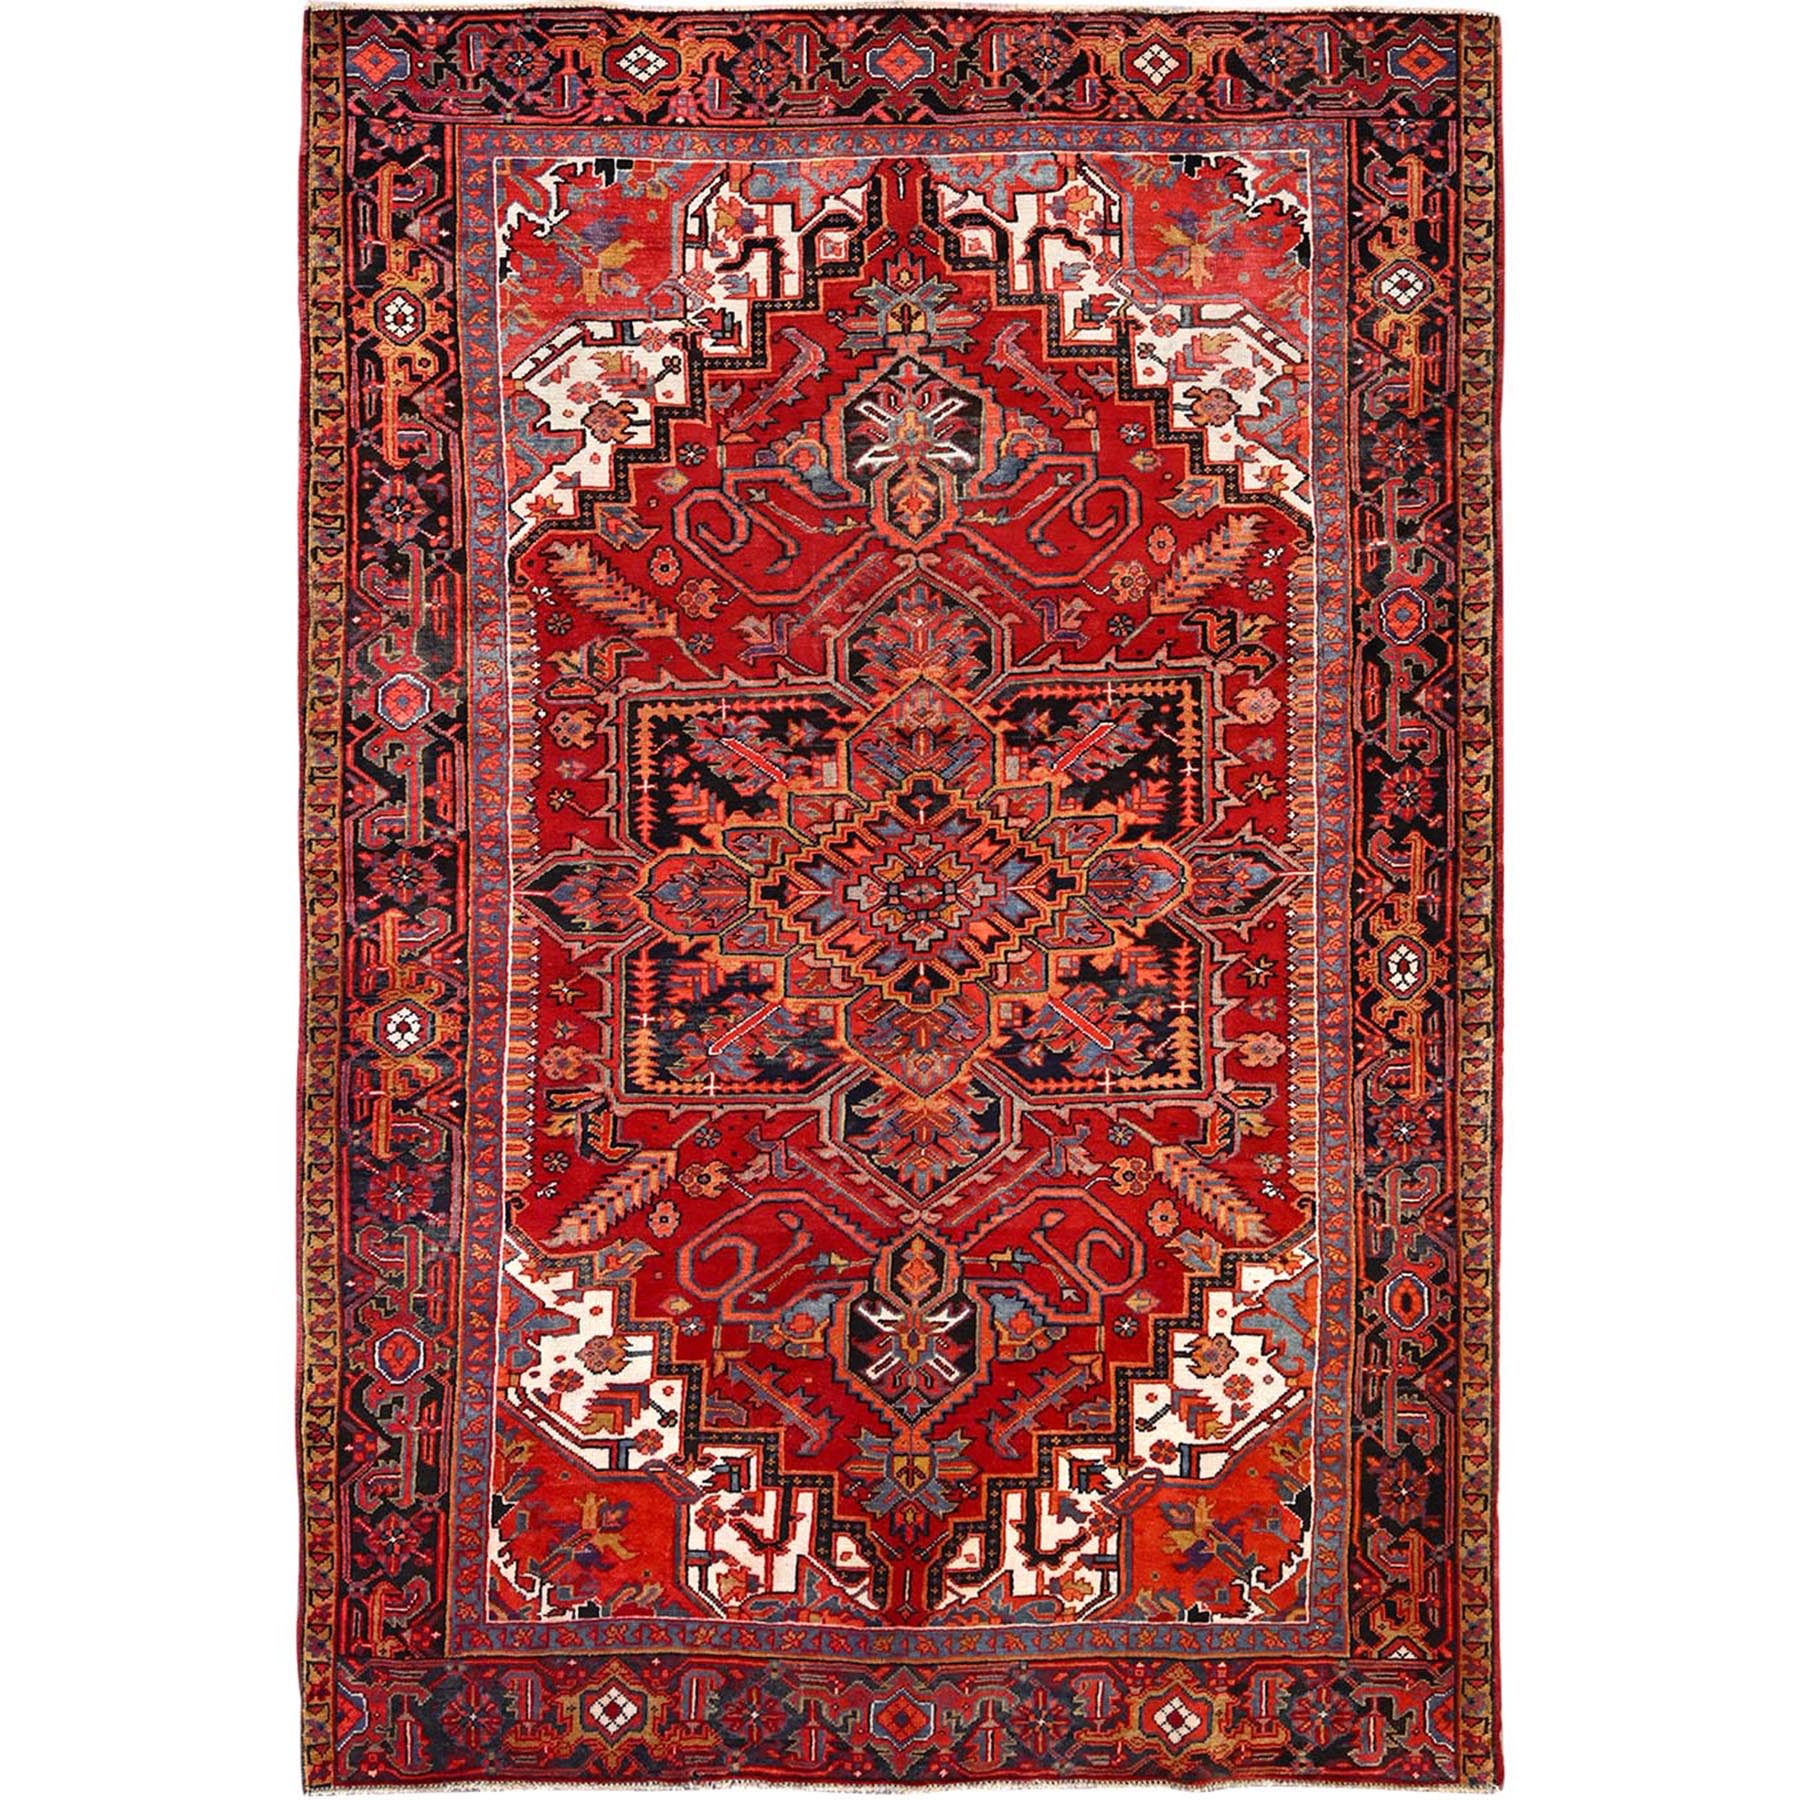  Wool Hand-Knotted Area Rug 6'5